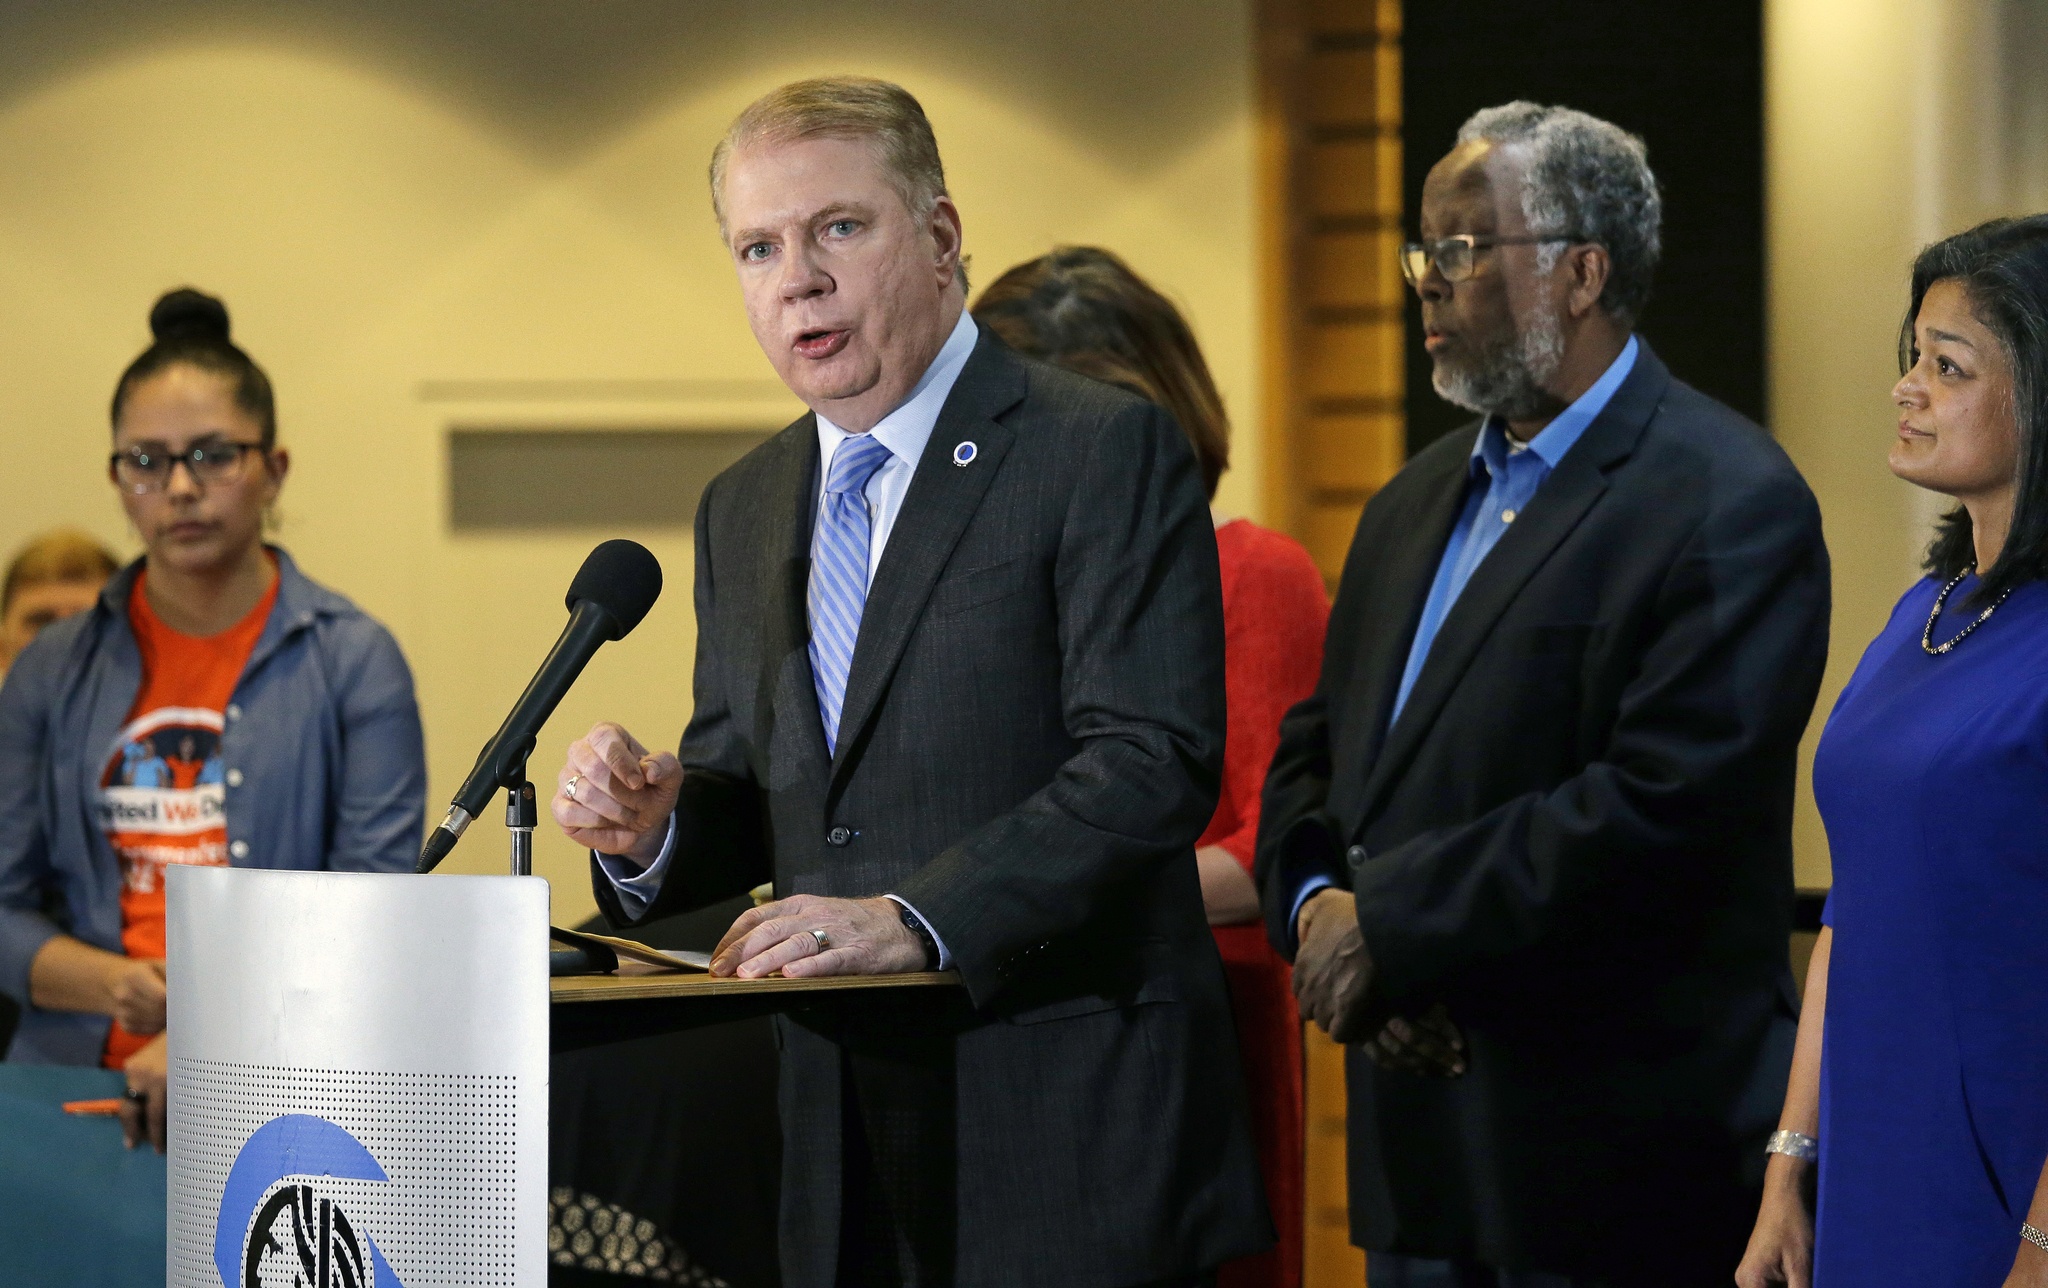 In this Nov. 9 photo, Seattle Mayor Ed Murray, second from left, speaks at a post-election event of elected officials and community leaders at City Hall in Seattle. (Elaine Thompson/The Associated Press)